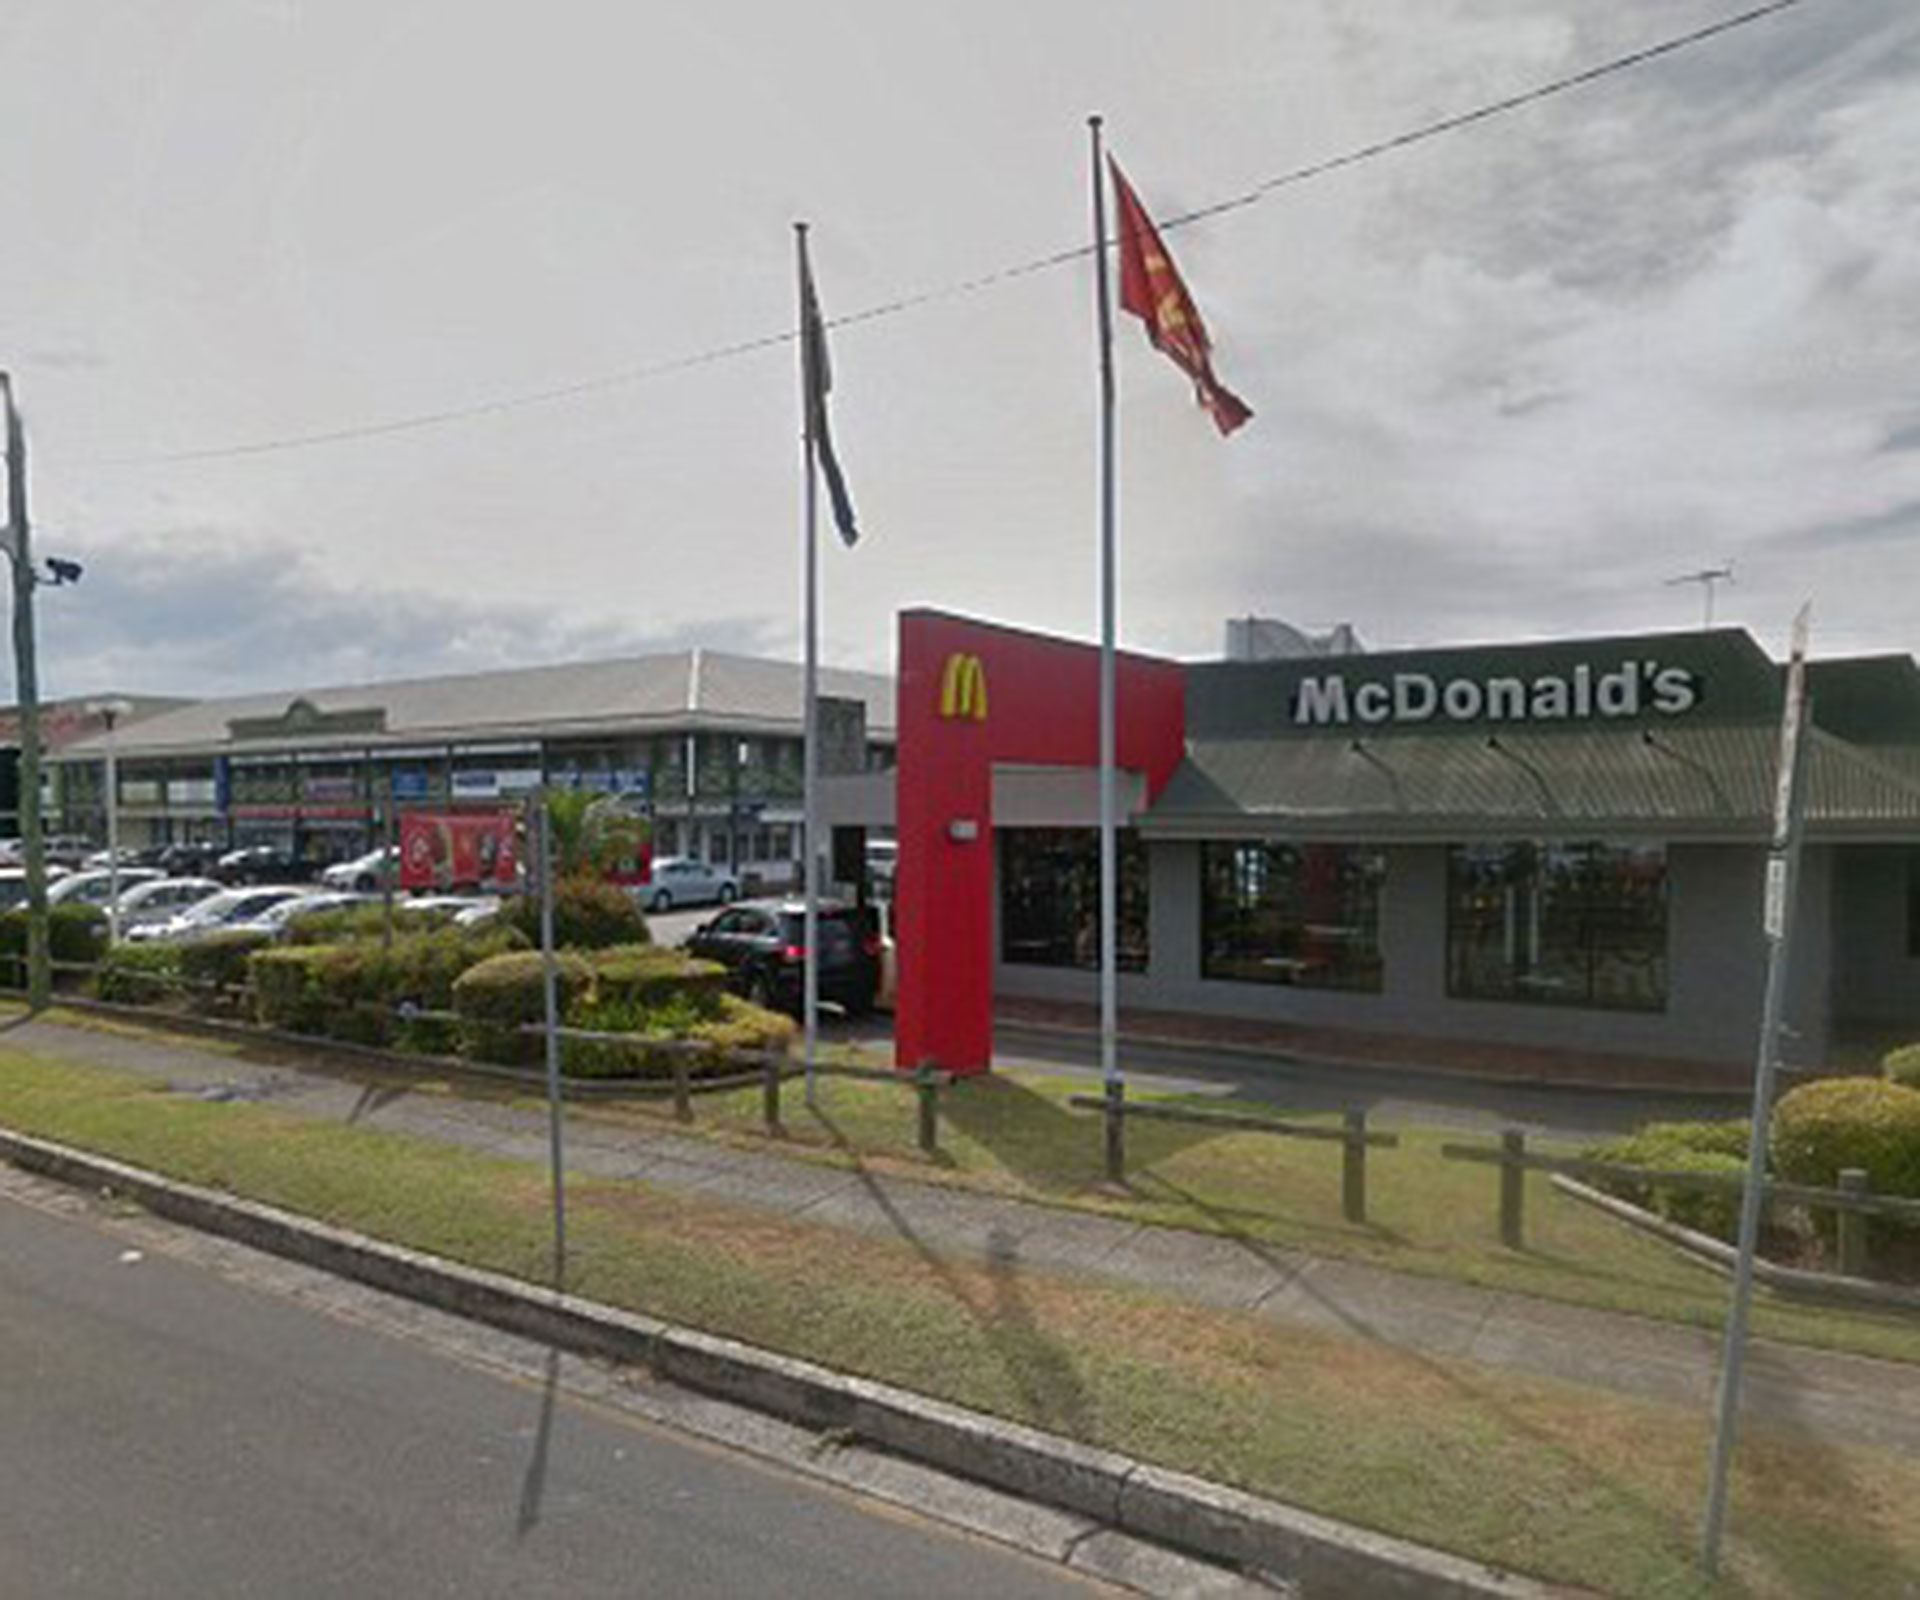 Six-year-old molested at Sydney McDonald’s